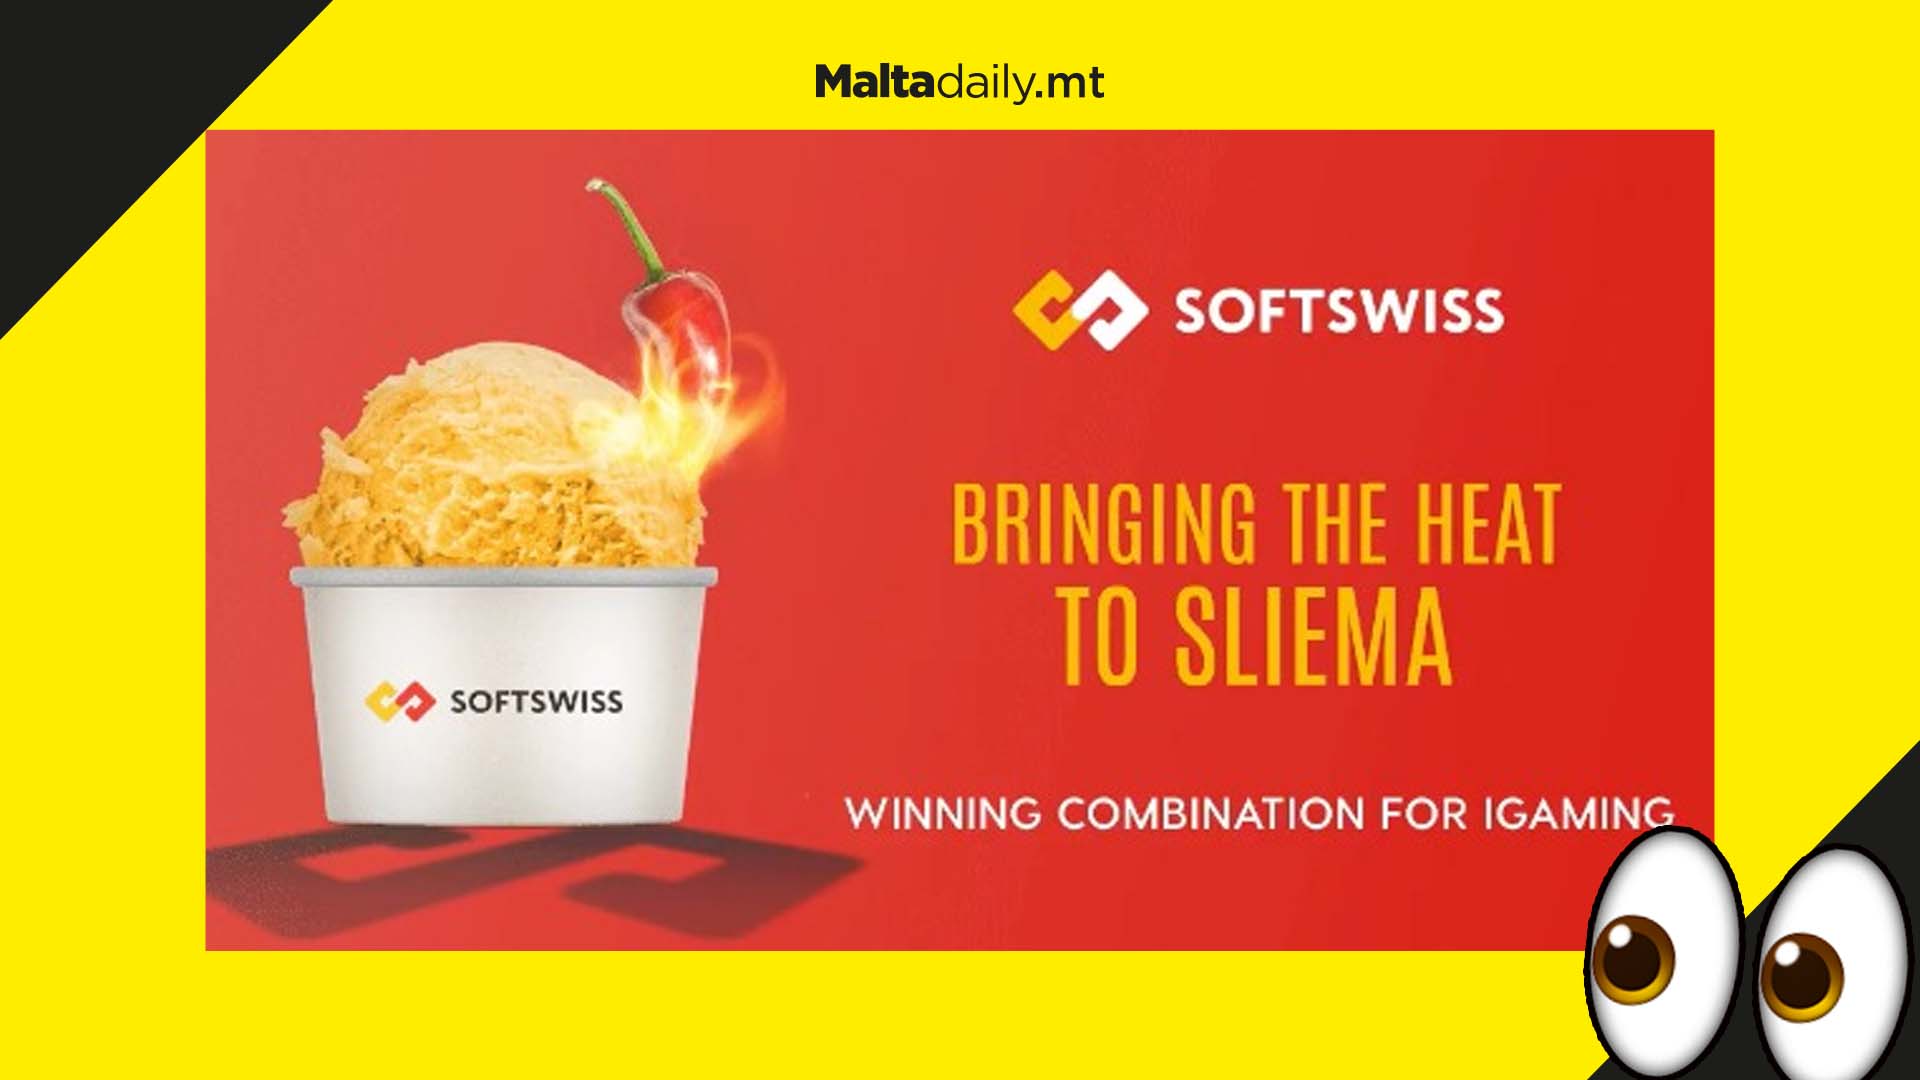 SOFTSWISS Adds Cooling Spice to its Presence in Malta